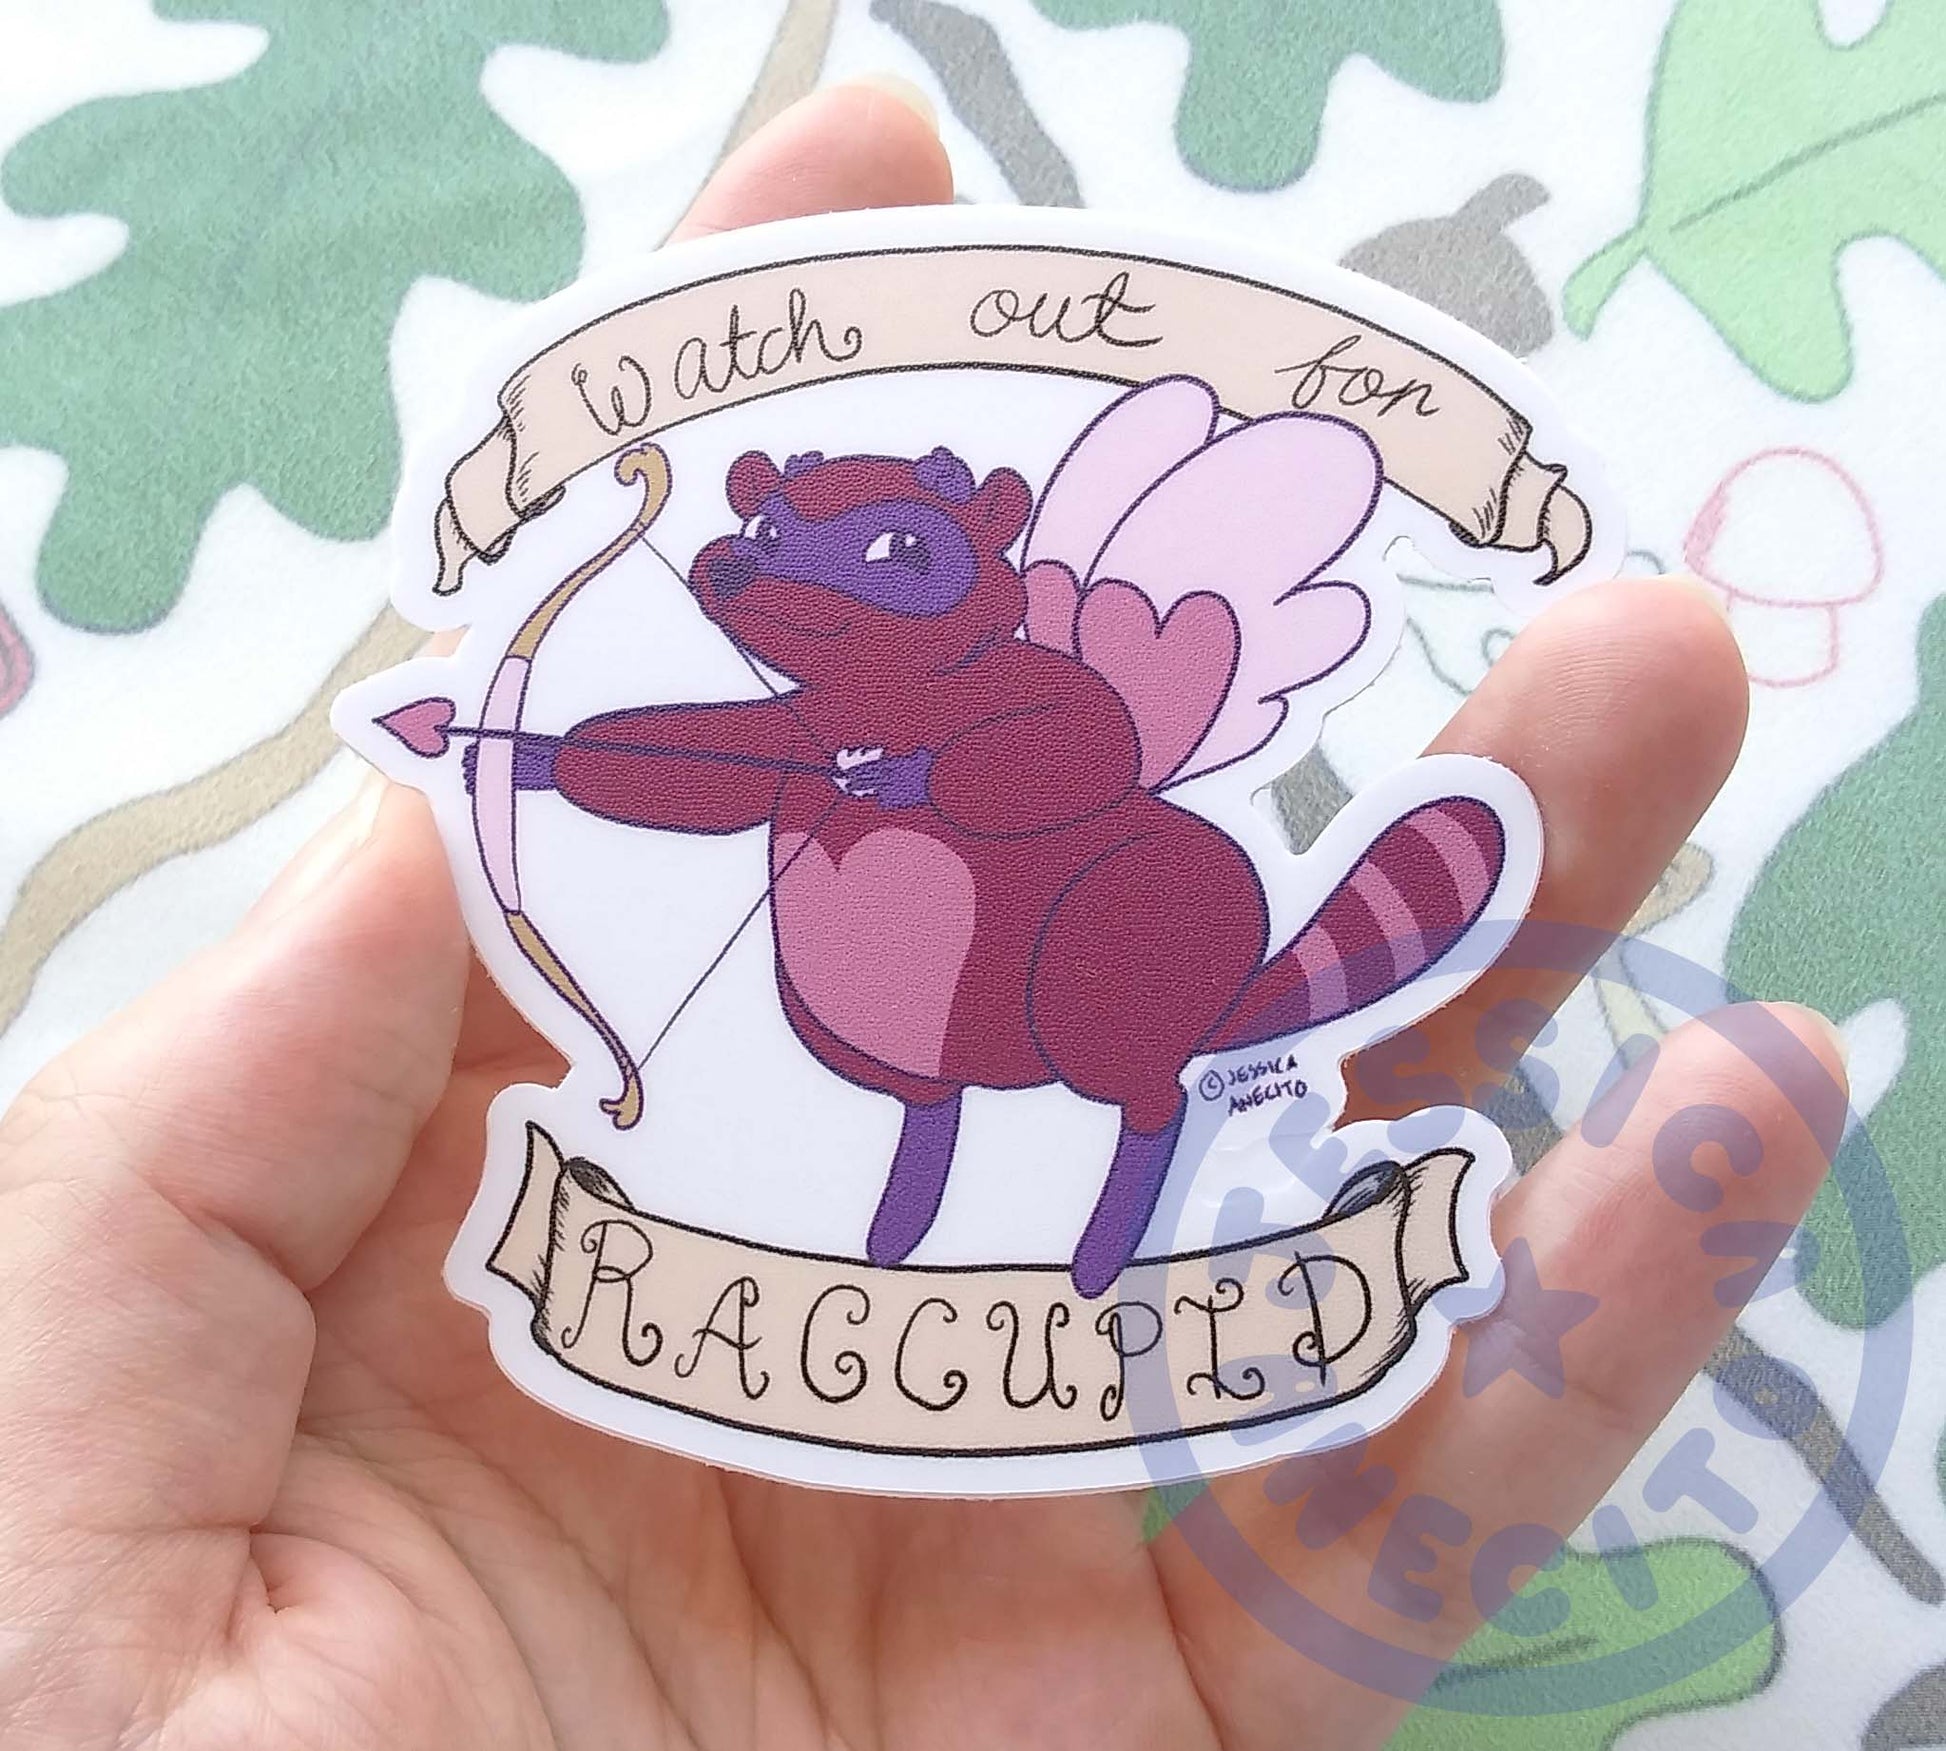 A hand is holding a smooth looking sticker of a purple and pink racoon. The racoon has a heart shape on it's belly and nose and pink wings. It is holding a bow with an arrow that has a heart instead of an arrowhead. Text on a scroll above and below the raccoon says, "watch out for Raccupid"